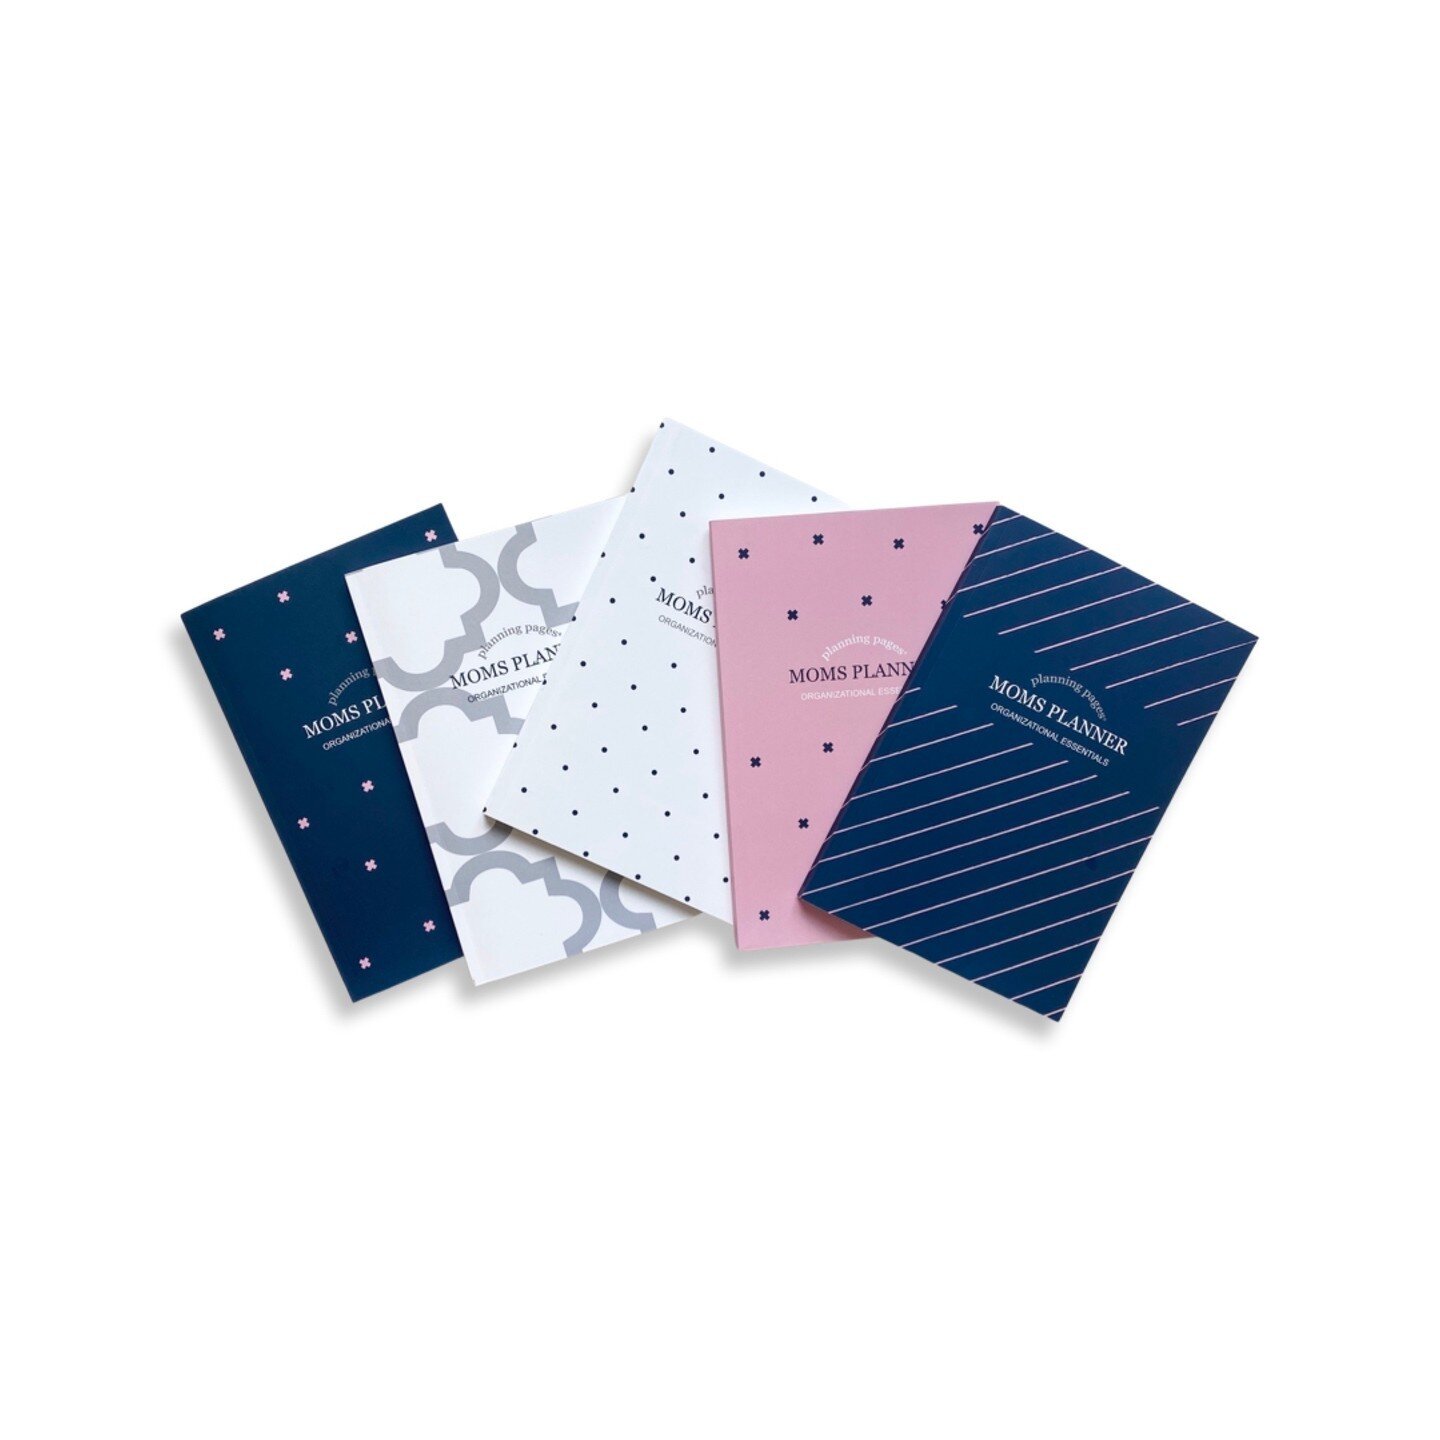 A planner designed especially for moms.  Helping us organize our weekly schedule, family meals, to-do list, goals and weekend activities.  It&rsquo;s fashionable, functional and the perfect size grab and go.⁠
⁠
Brand new soft covers that are proudly 